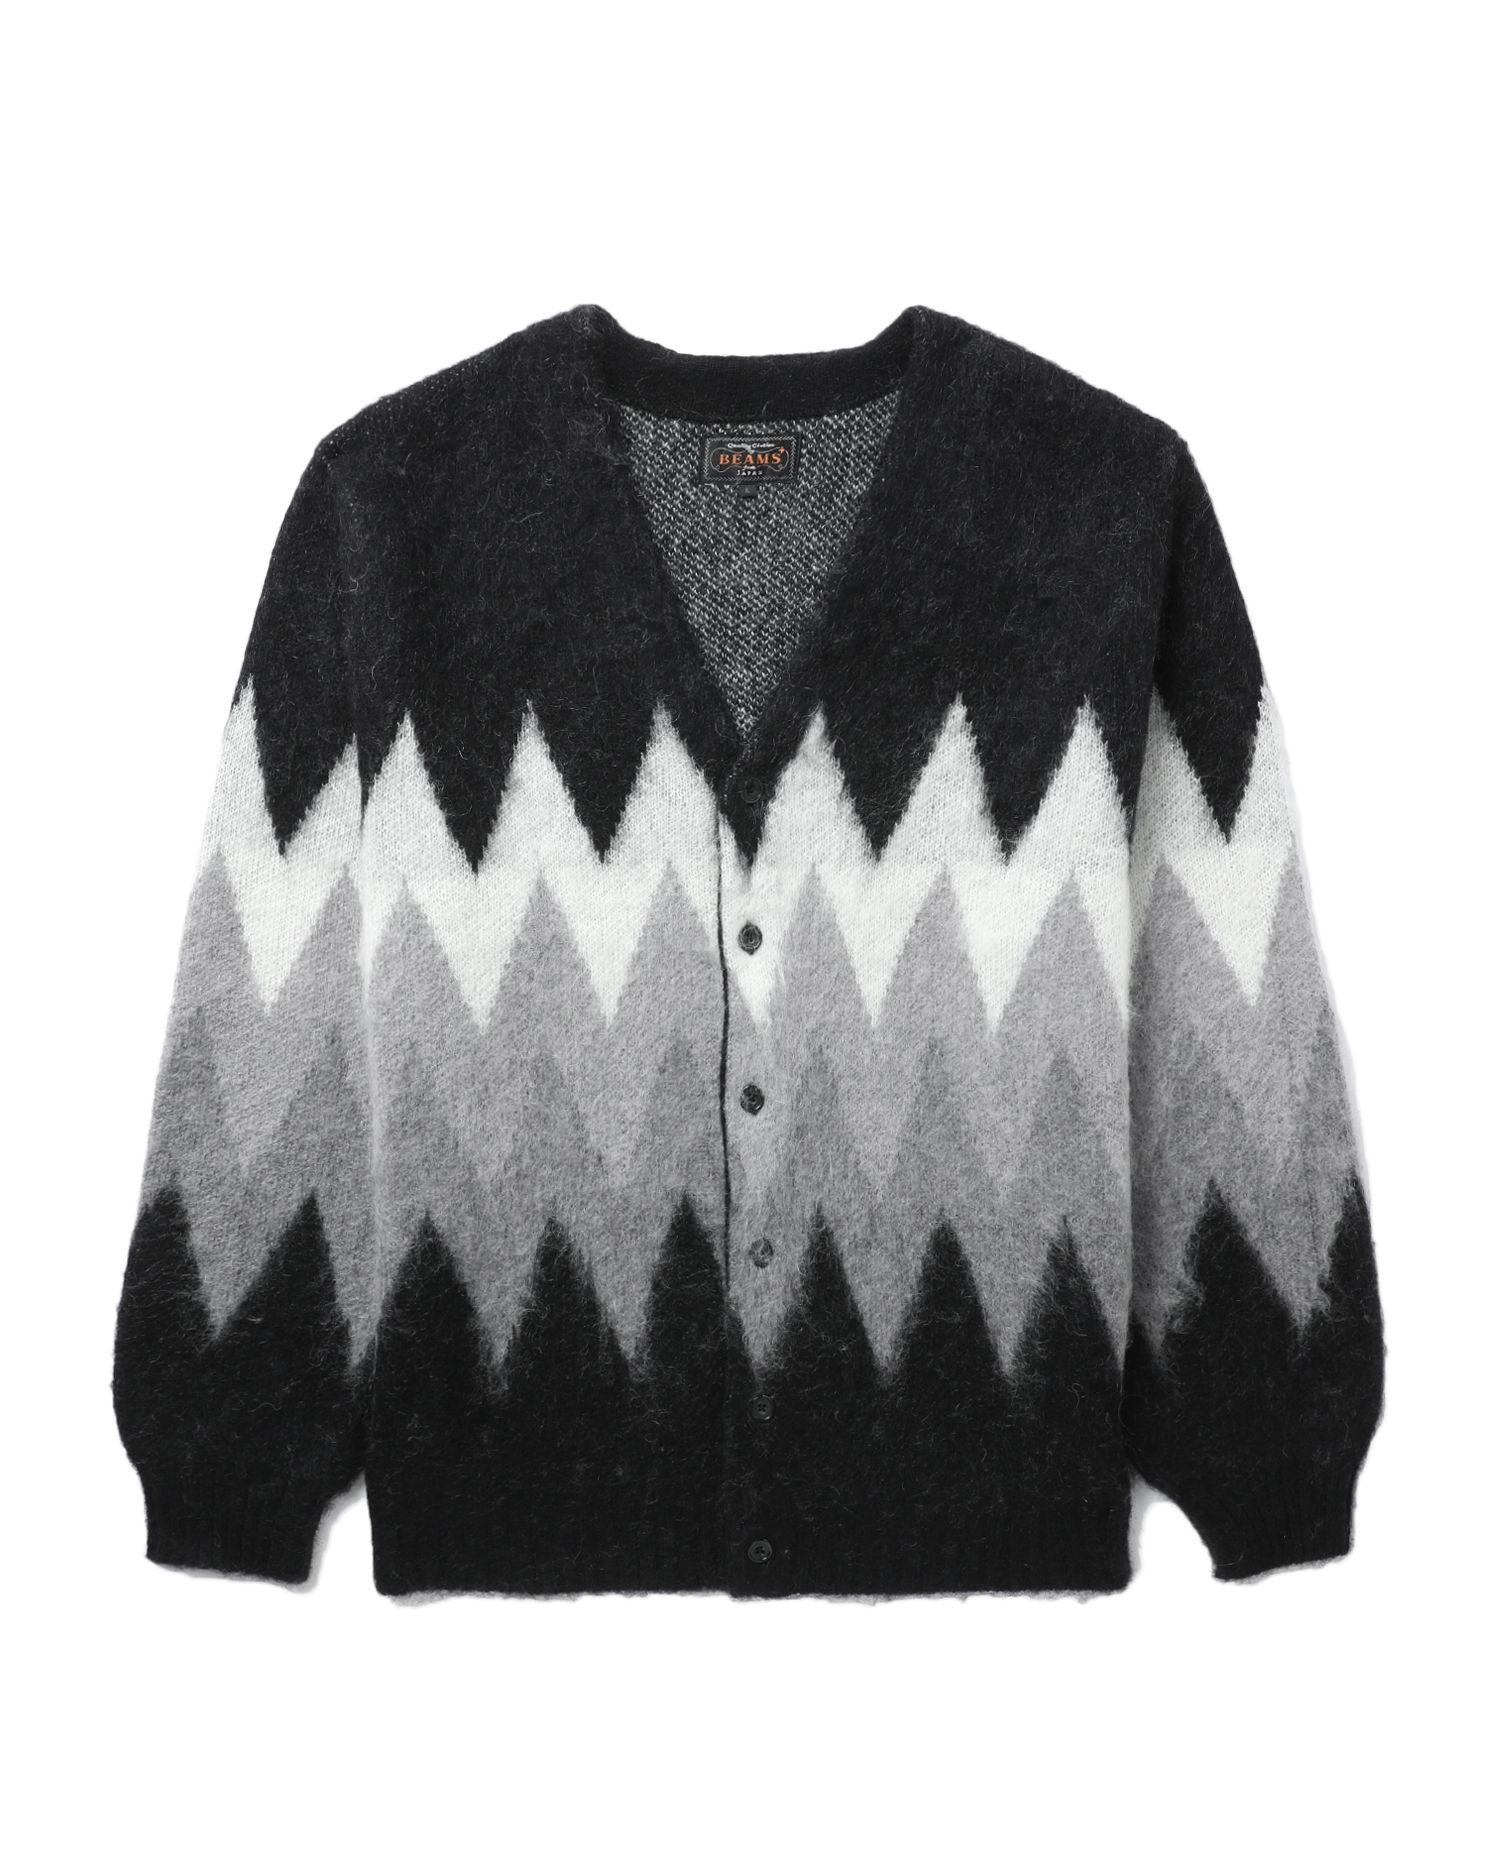 Graphic knit relaxed cardigan by BEAMS PLUS